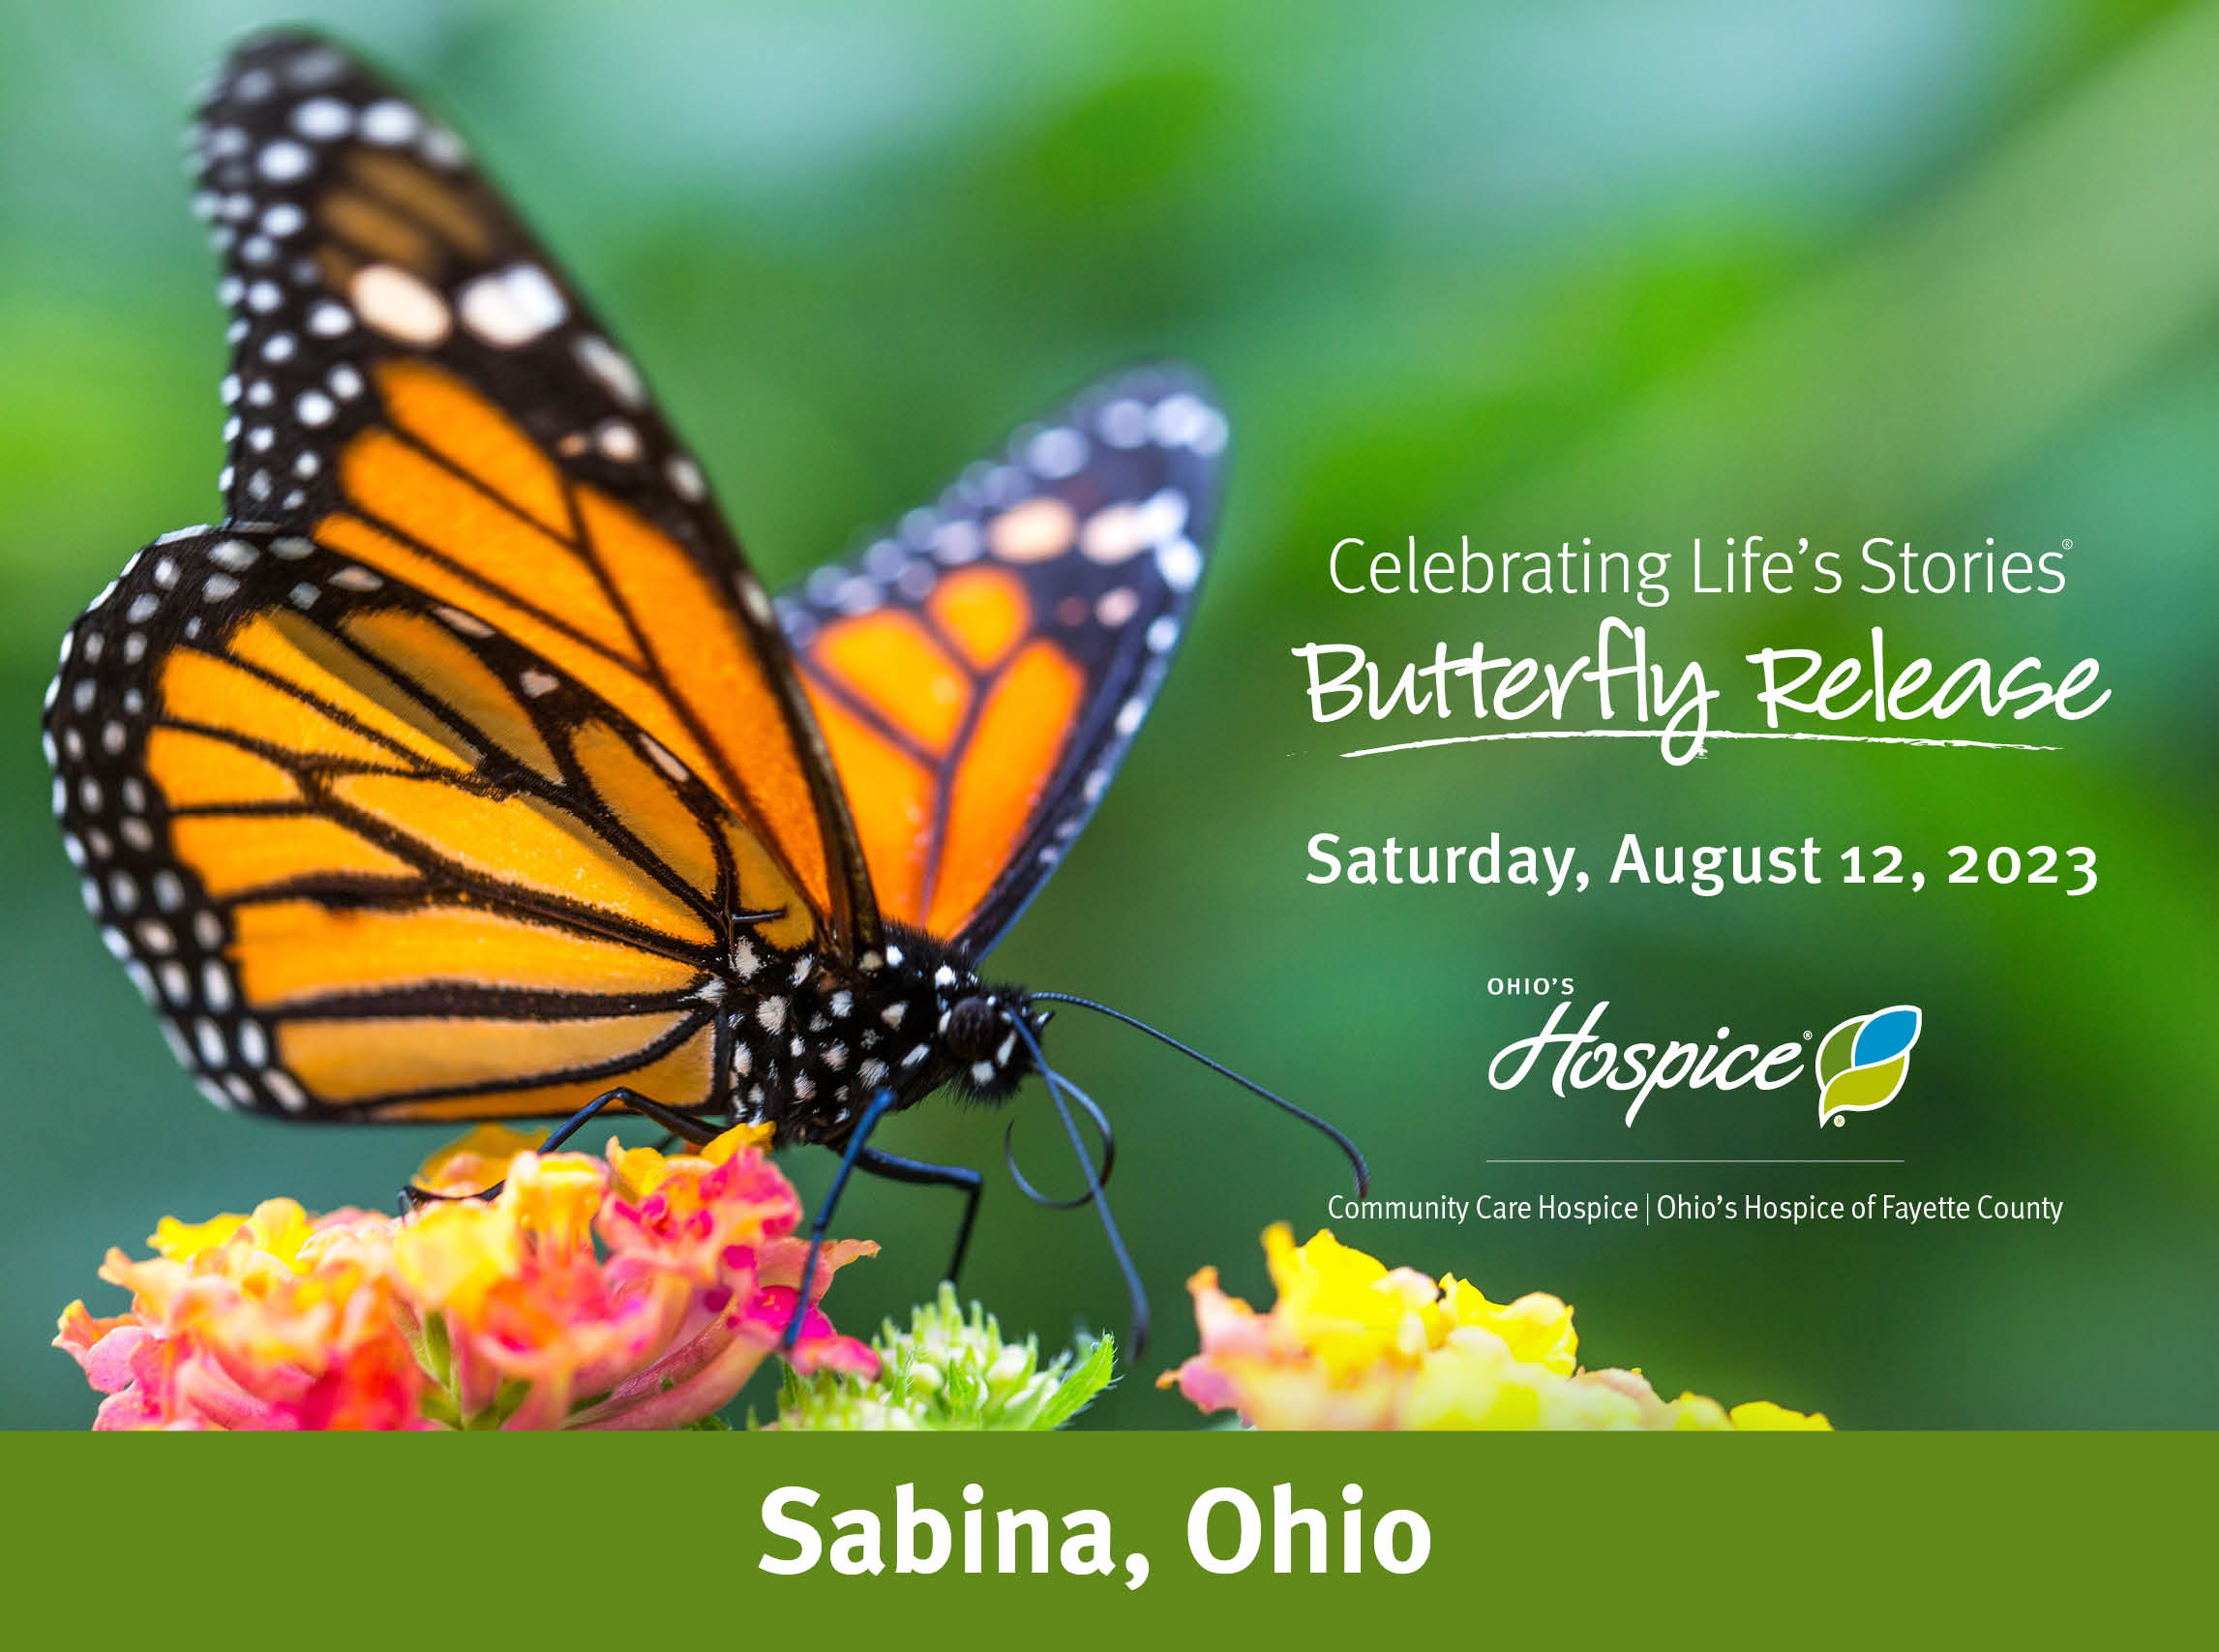 Celebrating Life's Stories Butterfly Release, Saturday, August 12, 2023, Ohio's Hospice, Community Care Hospice, Ohio's Hospice of Fayette County, Sabina, Ohio